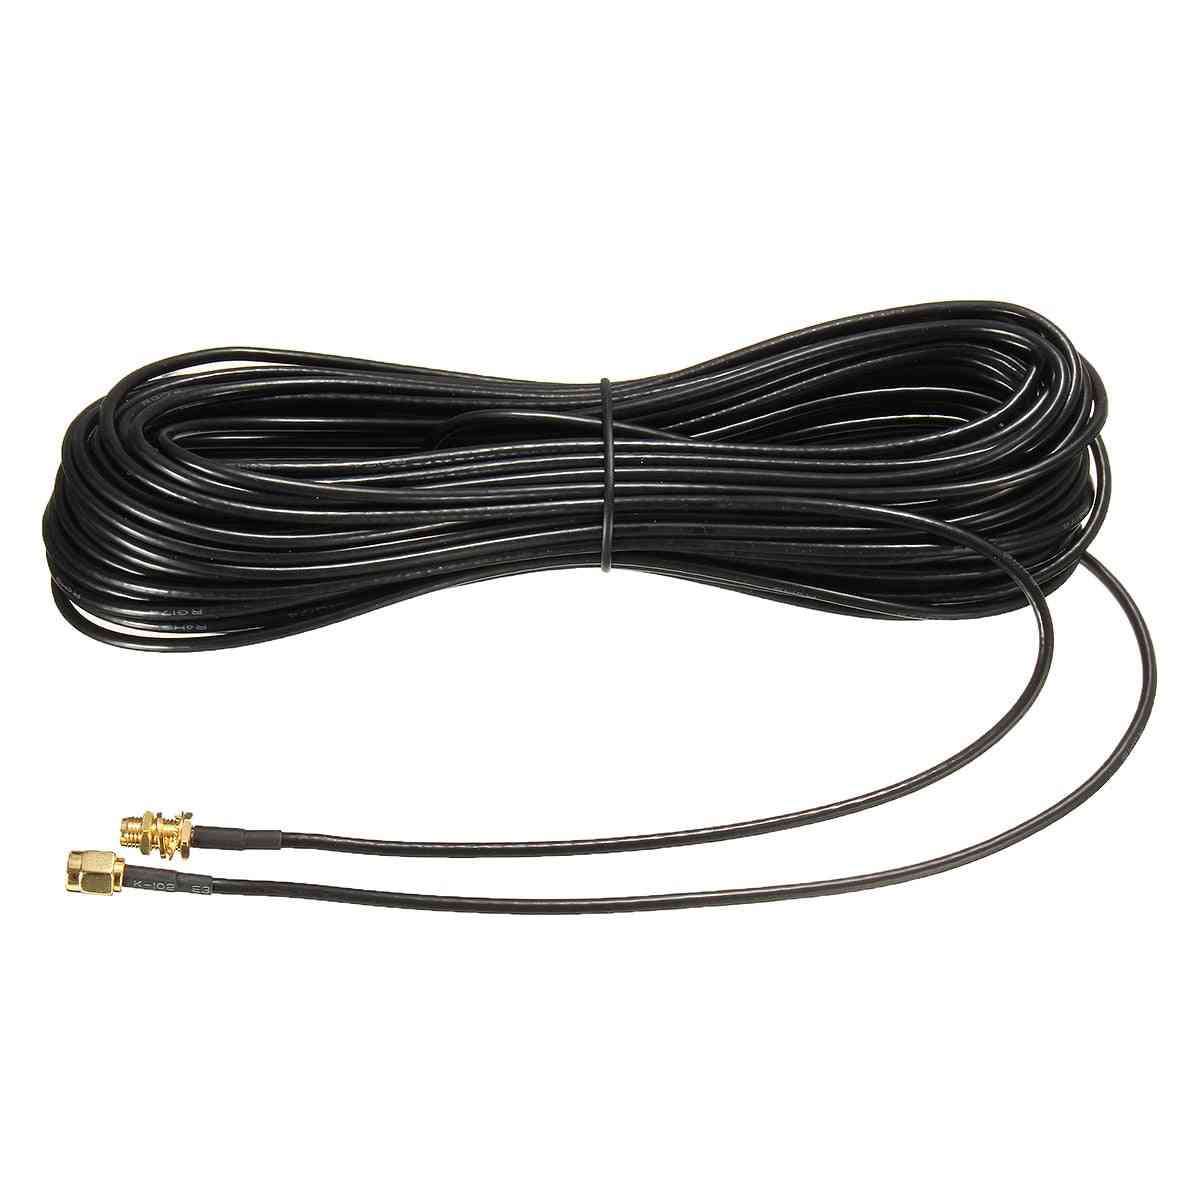 Sma Male To Female Wireless Antenna Extension Cables